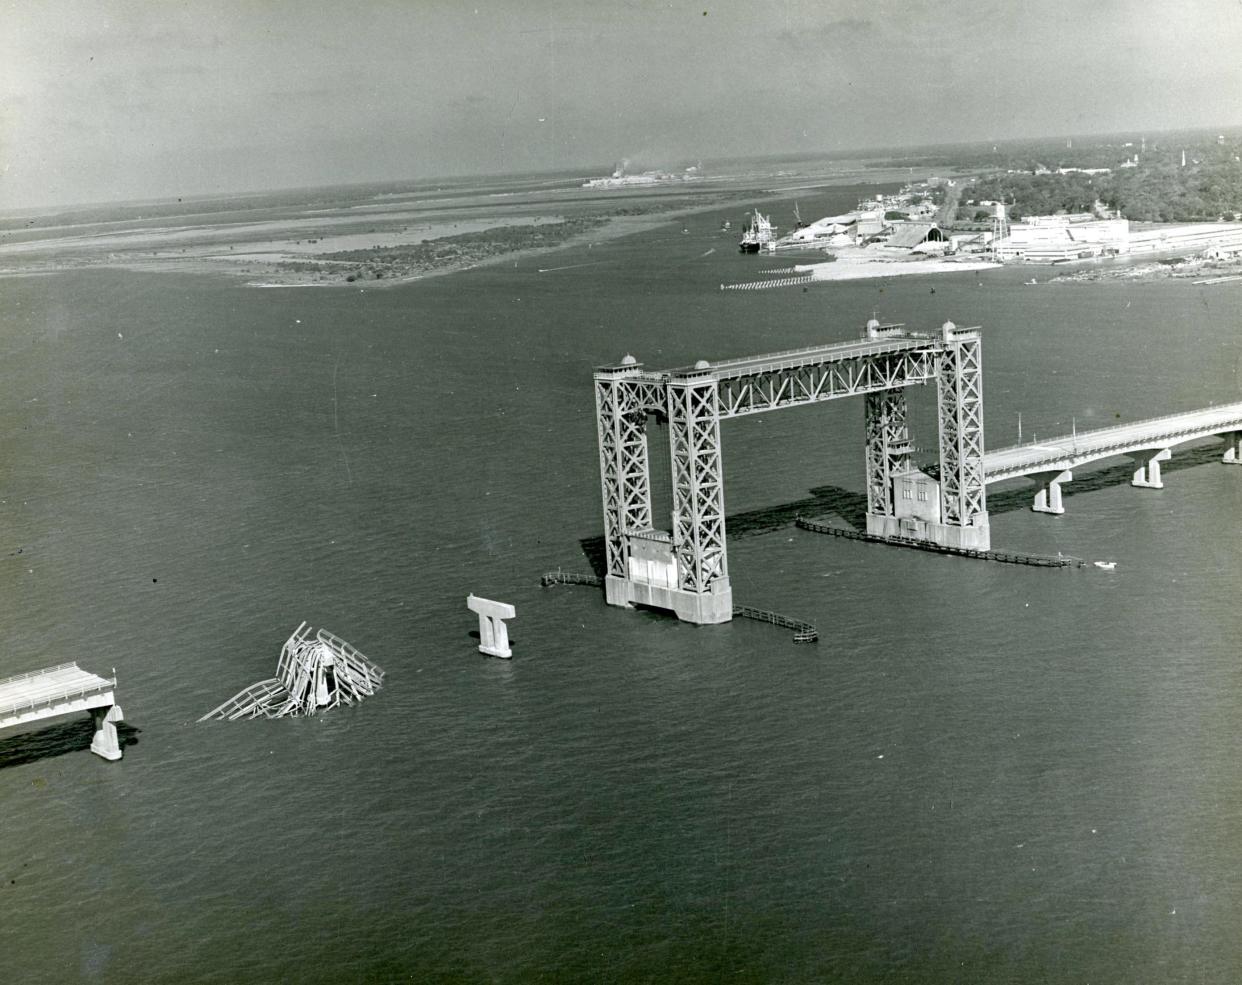 Overhead of Sidney Lanier Bridge taken November 8, 1972, the day after the African Neptune, docked in the background, hit the span.